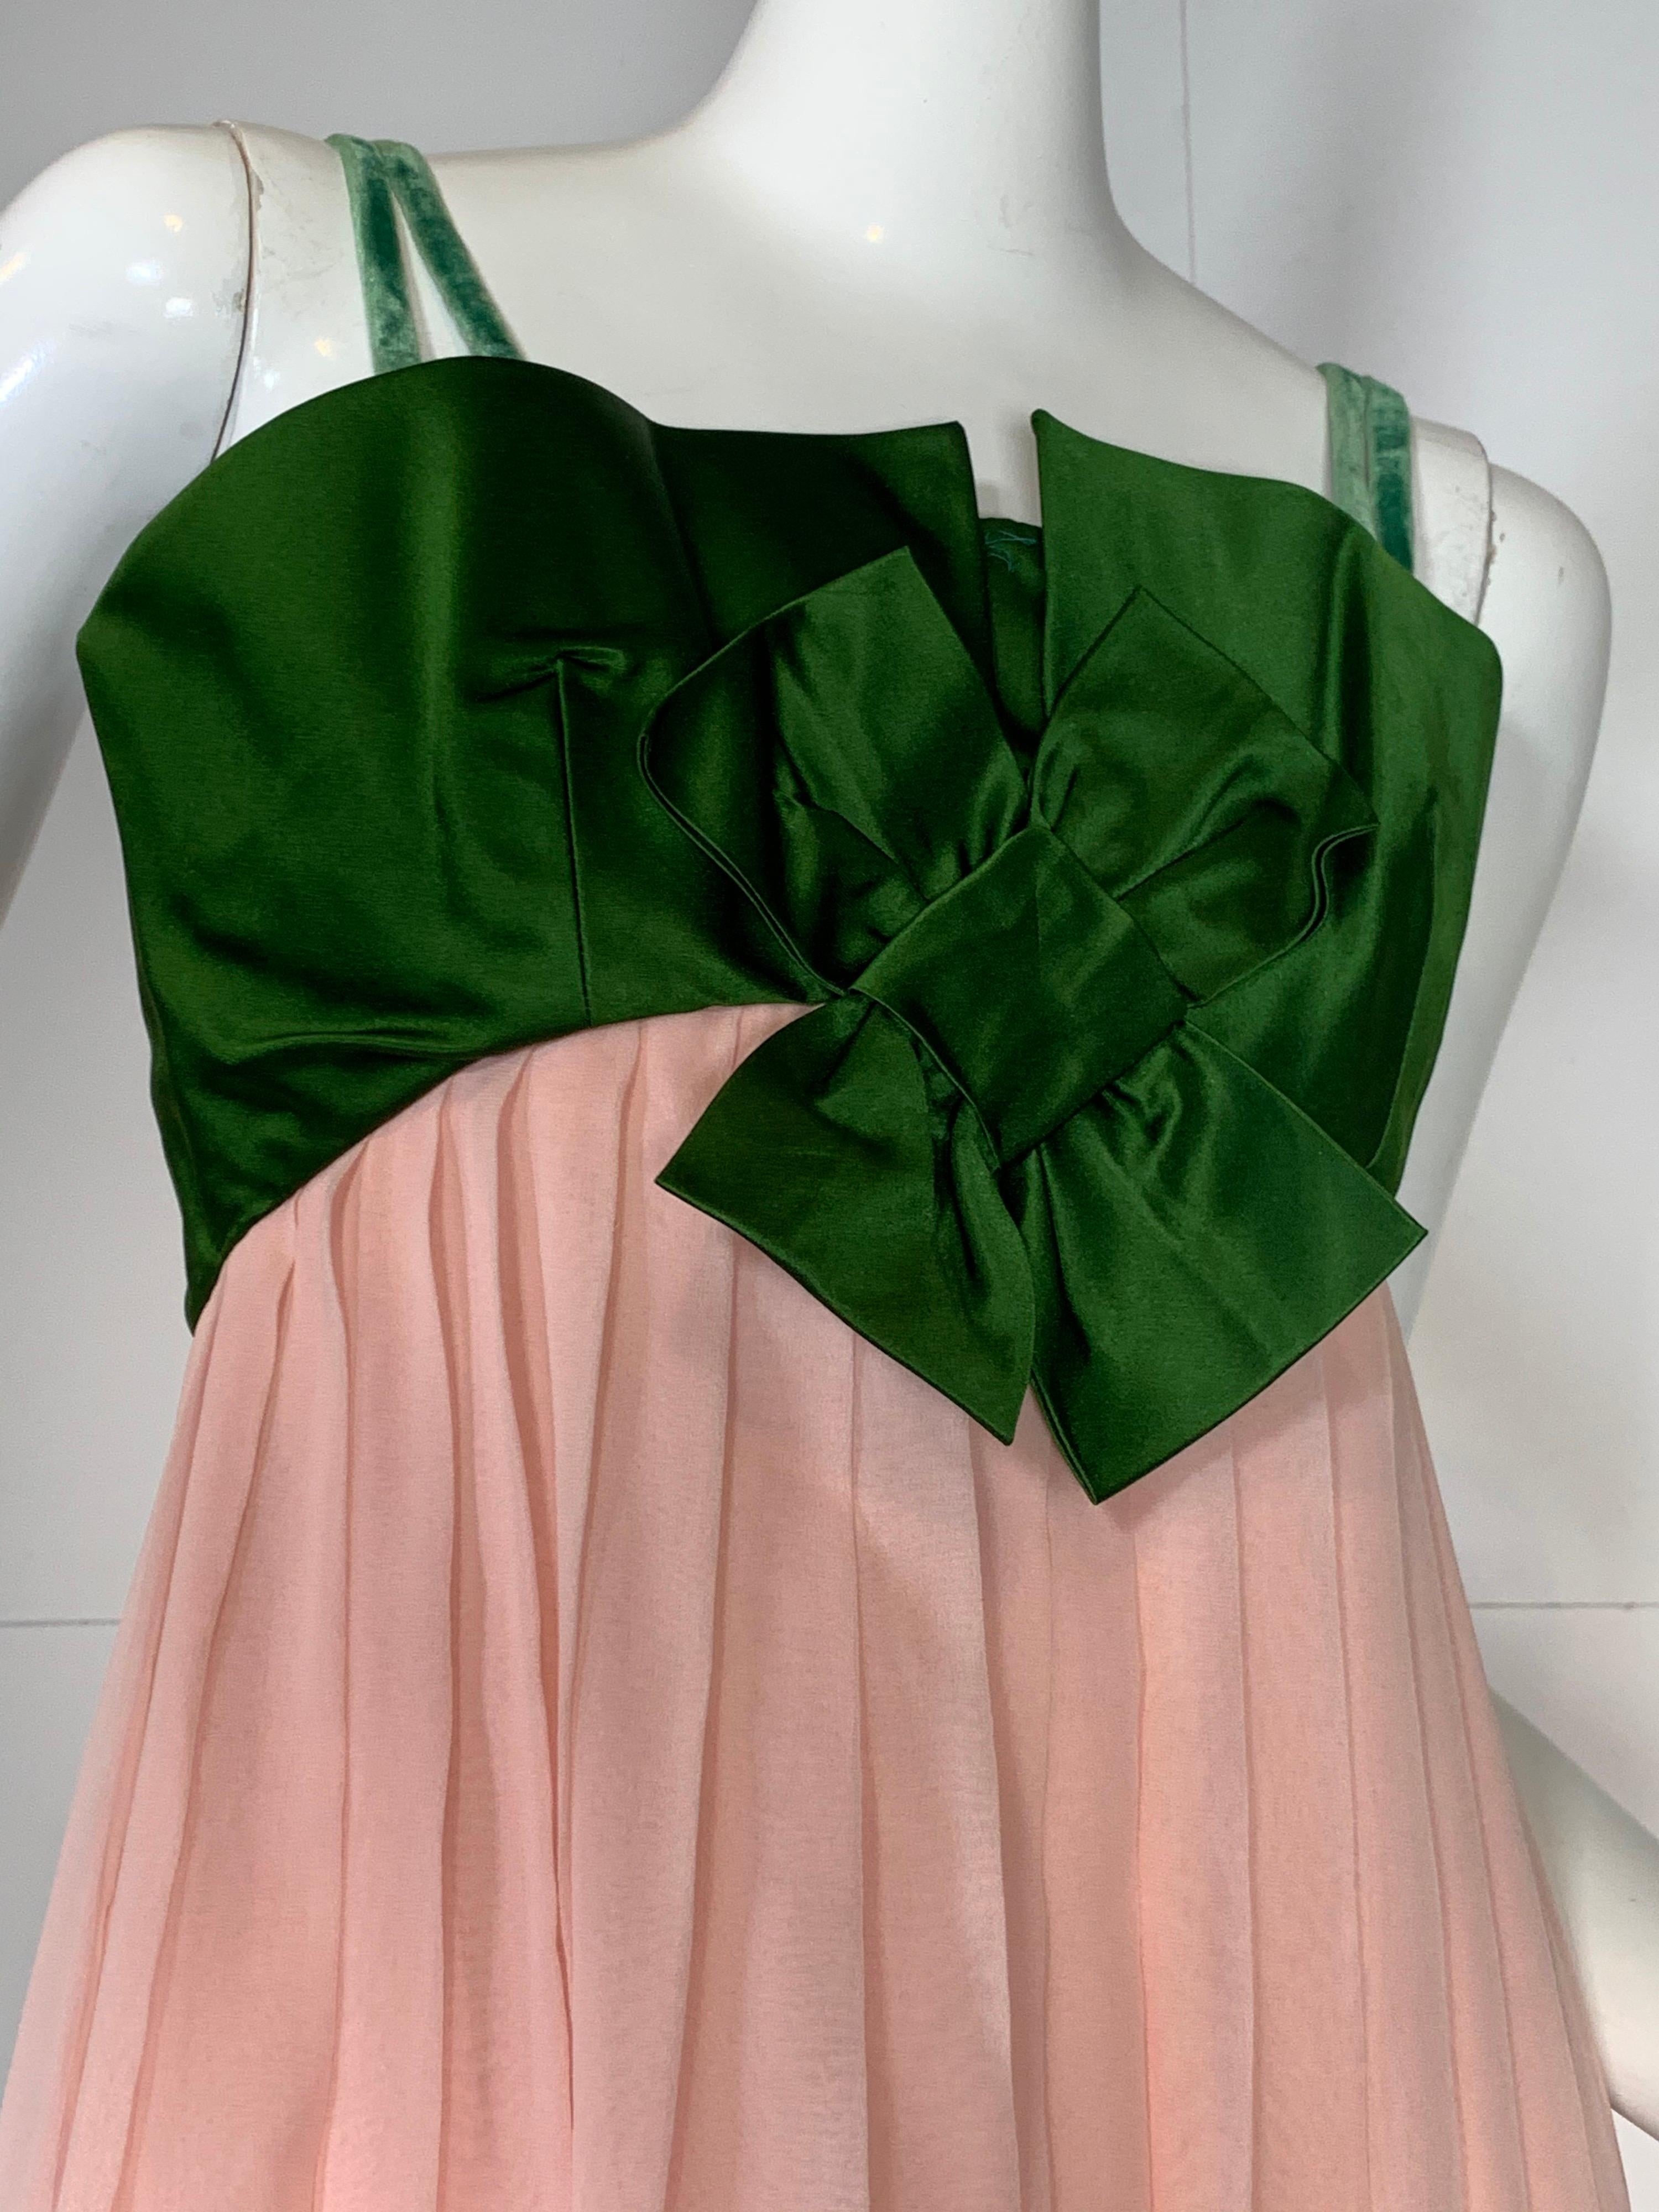 1960s Harold Levine Empire-waist olive green silk satin bodice gown with peach silk chiffon flowing skirt. Inner corset structure in bodice. Velvet ribbon straps added but could possibly be worn strapless. Back zipper. 